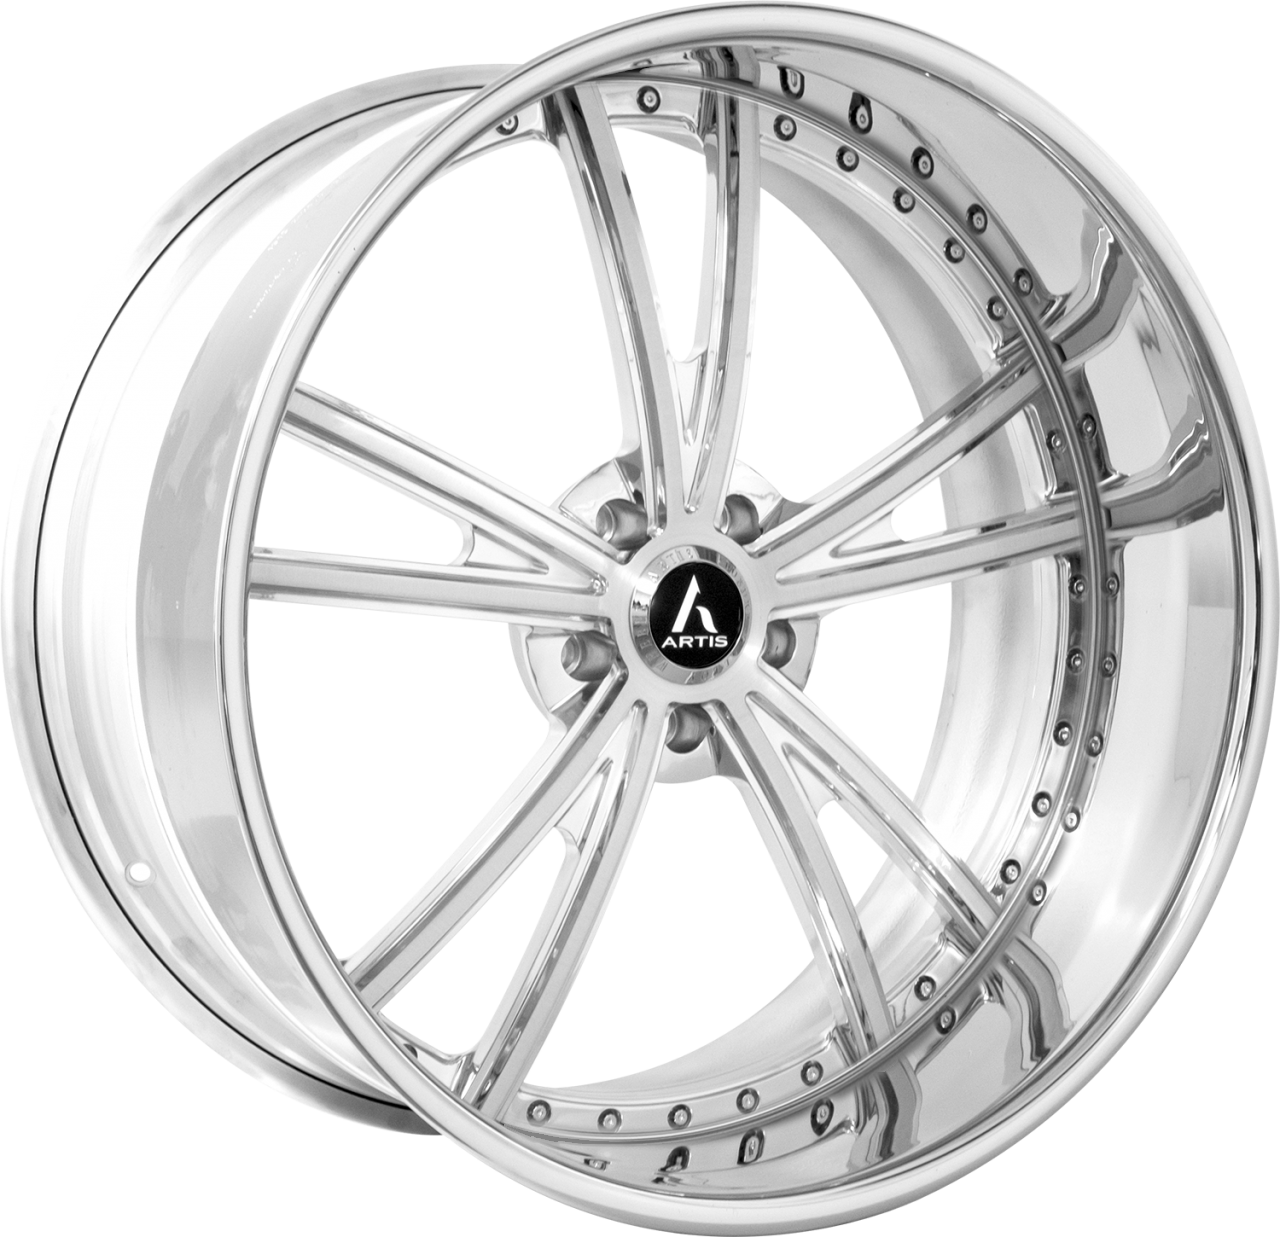 Artis Forged Corvair-M wheel with Brushed finish